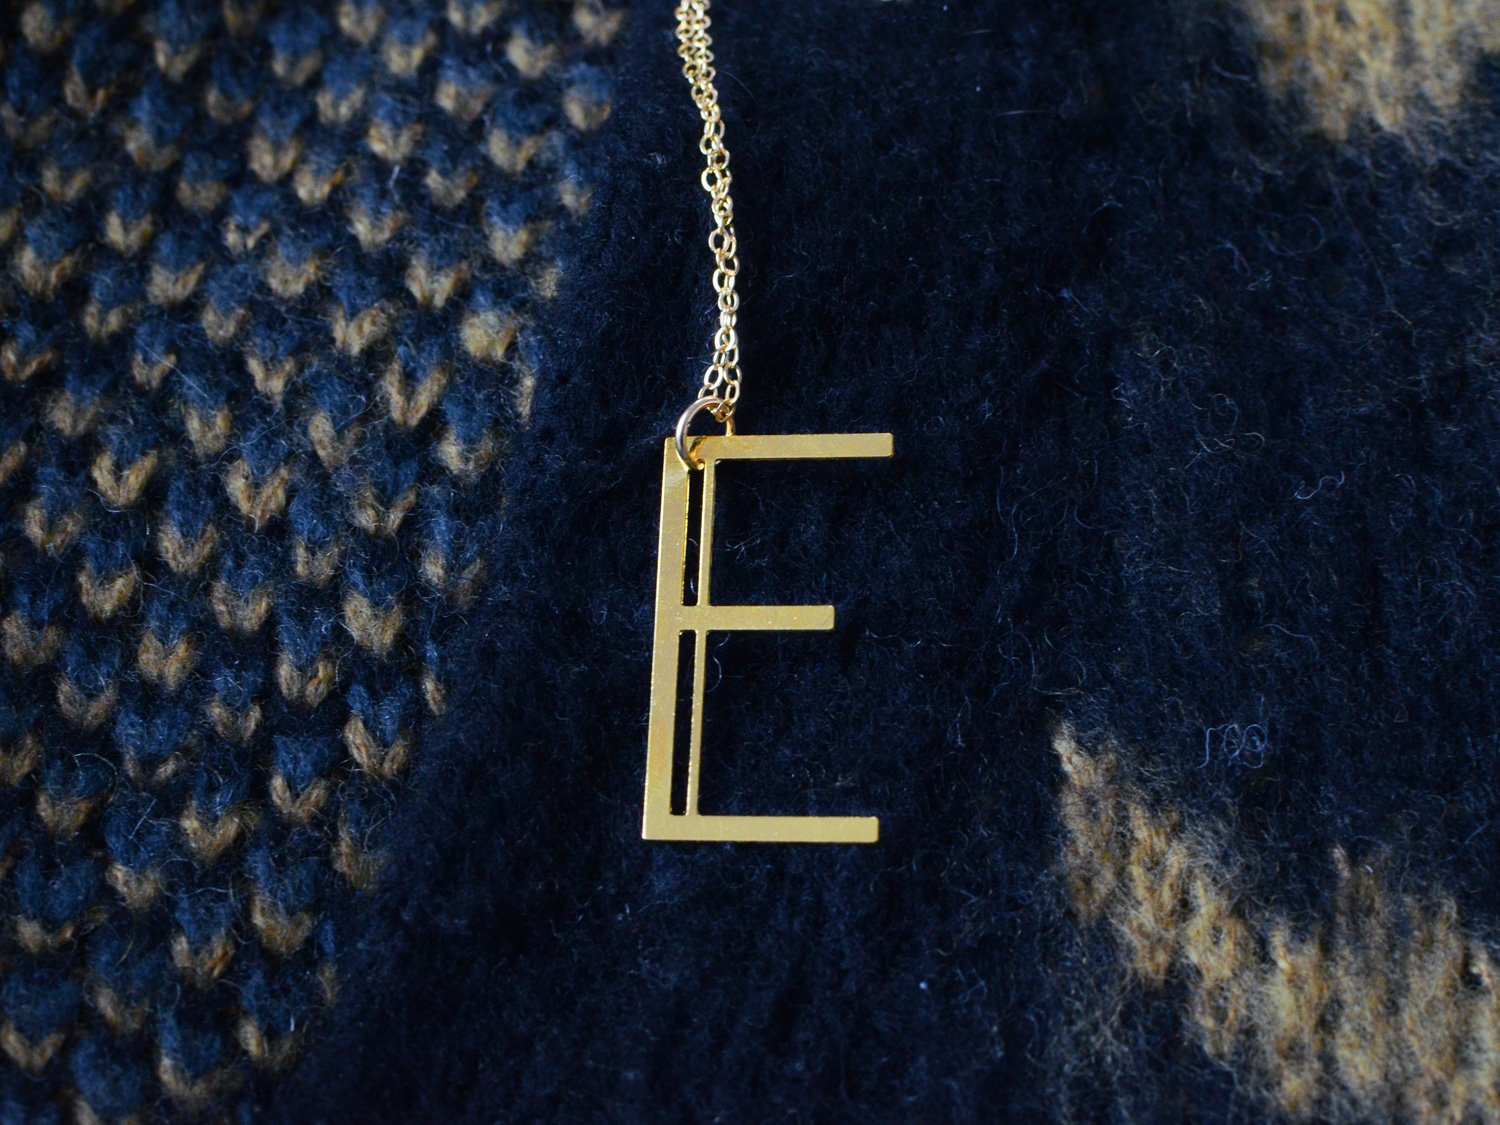 Alpha Necklace - Art Deco Typography Style - High Quality, Affordable, Self Love, Initial Letter Charm Necklace - Available in Gold and Silver - Made in USA - Brevity Jewelry